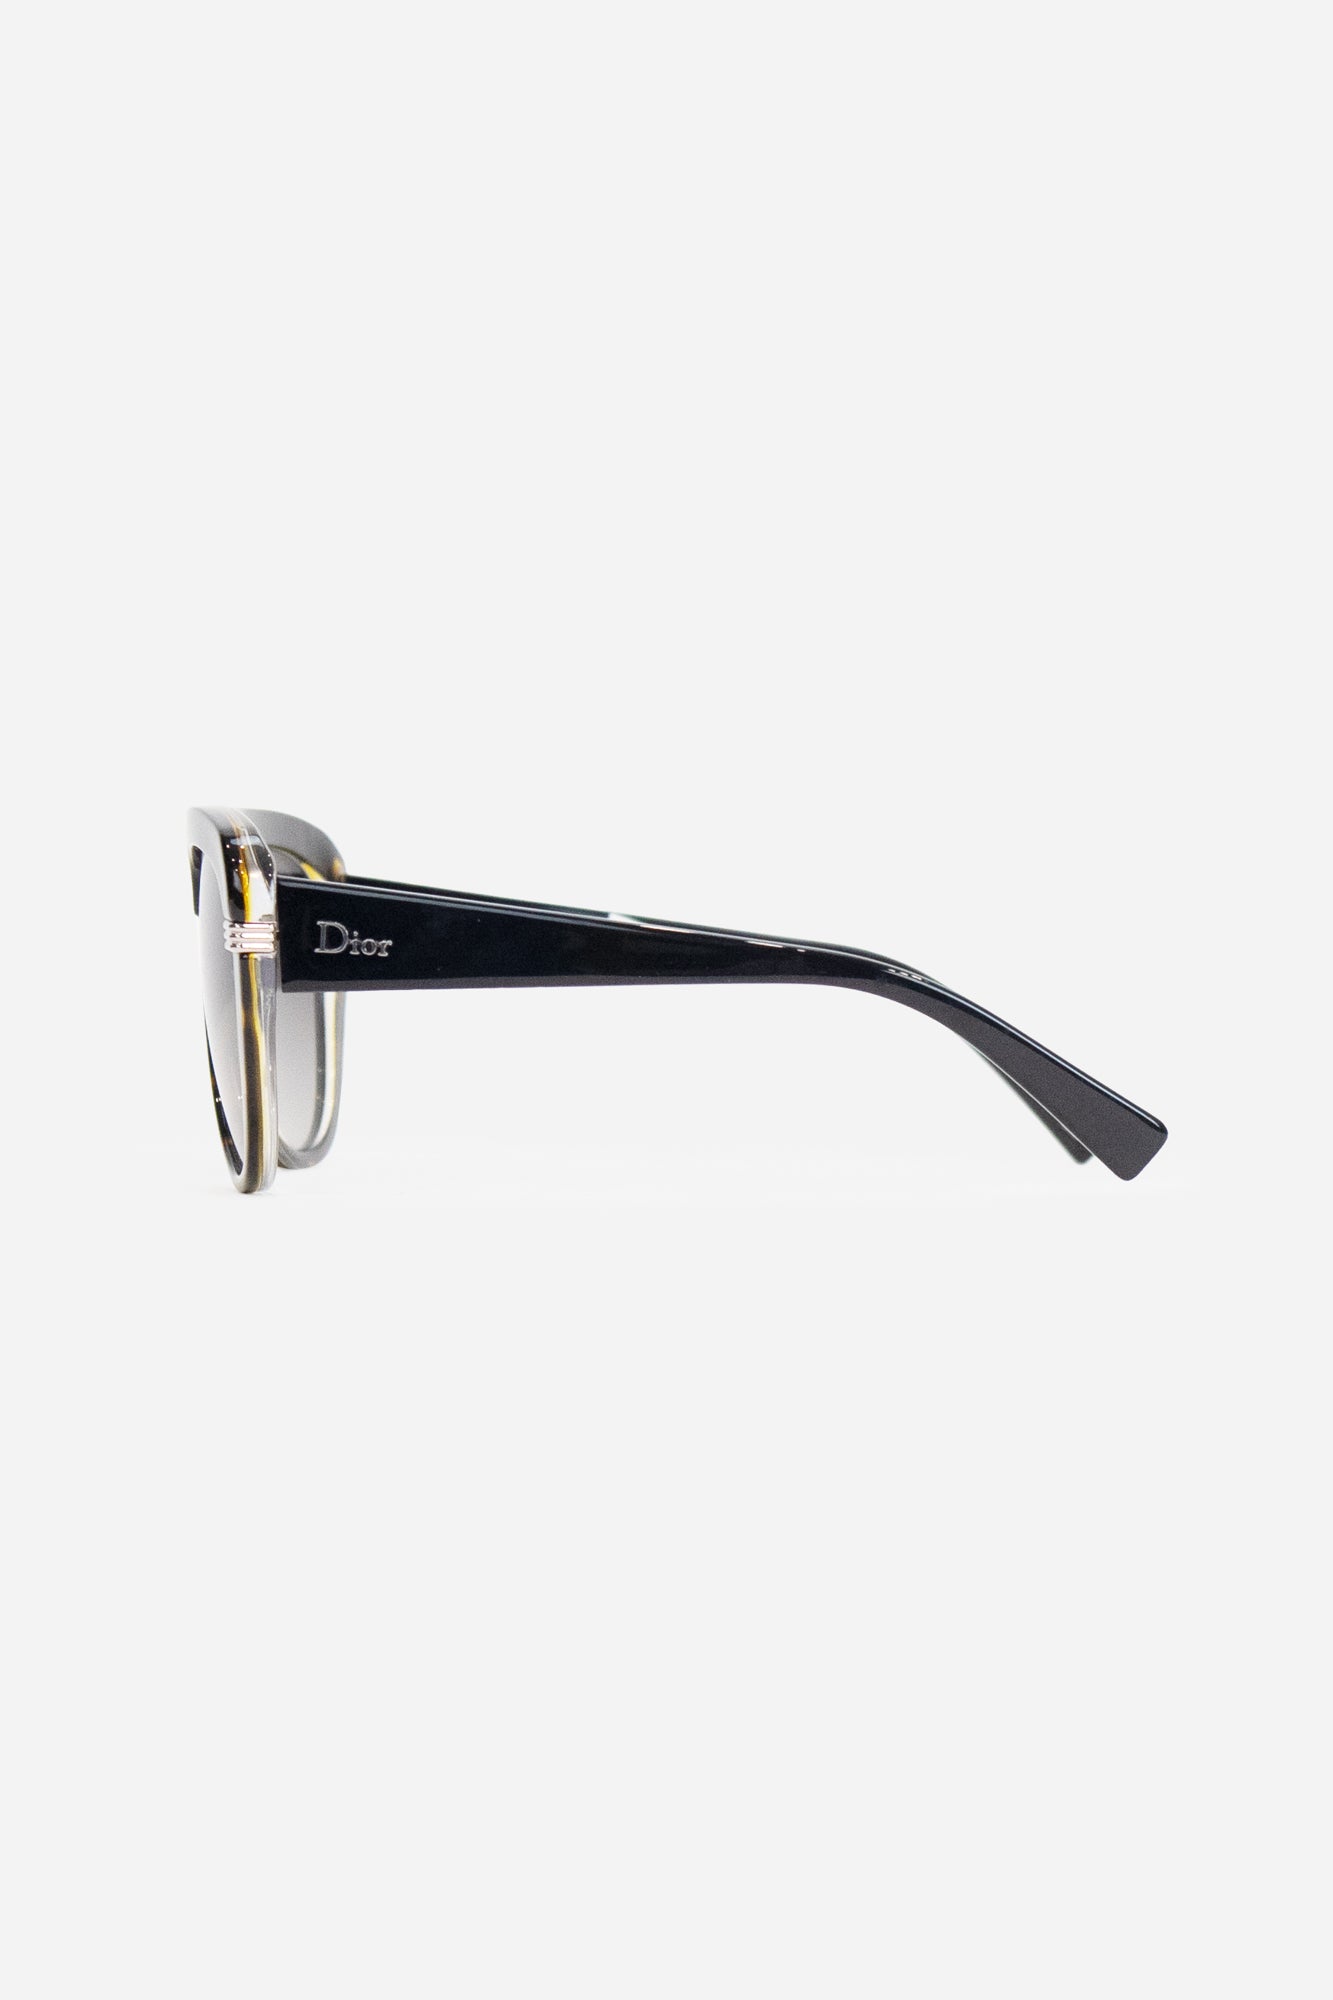 Thick Square Frame Sunglasses Dior Label On Side